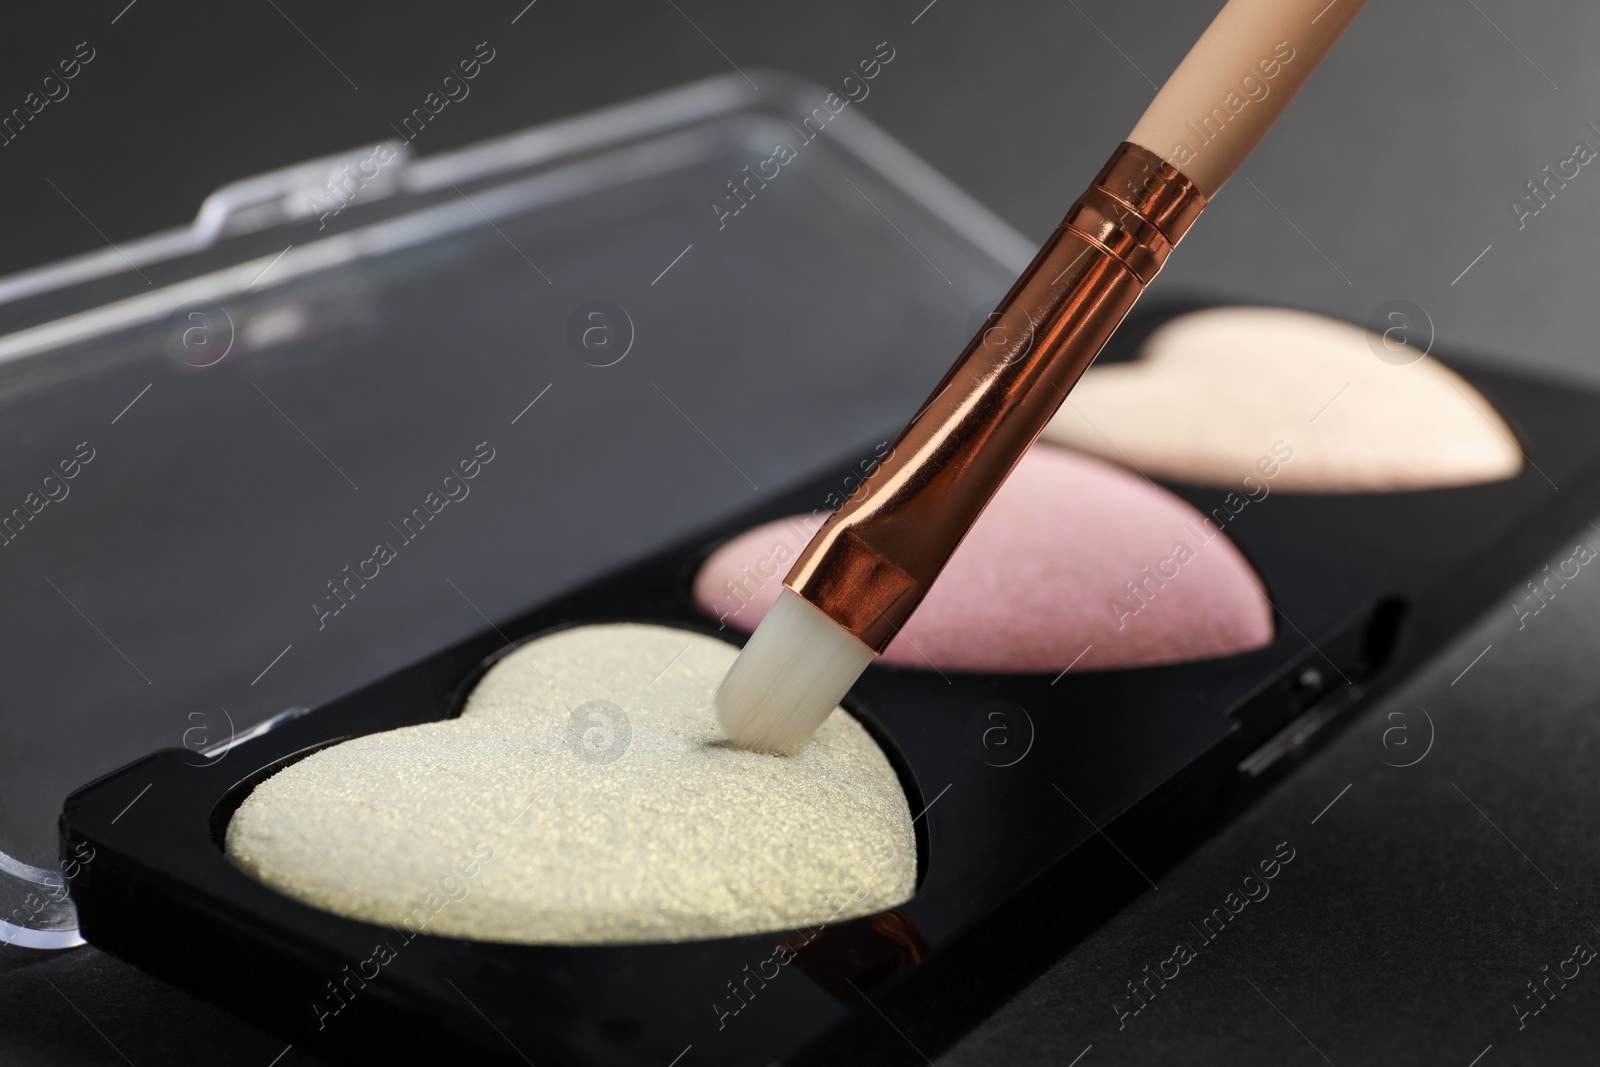 Photo of Palette of heart shaped eyeshadows with brush on dark background, closeup